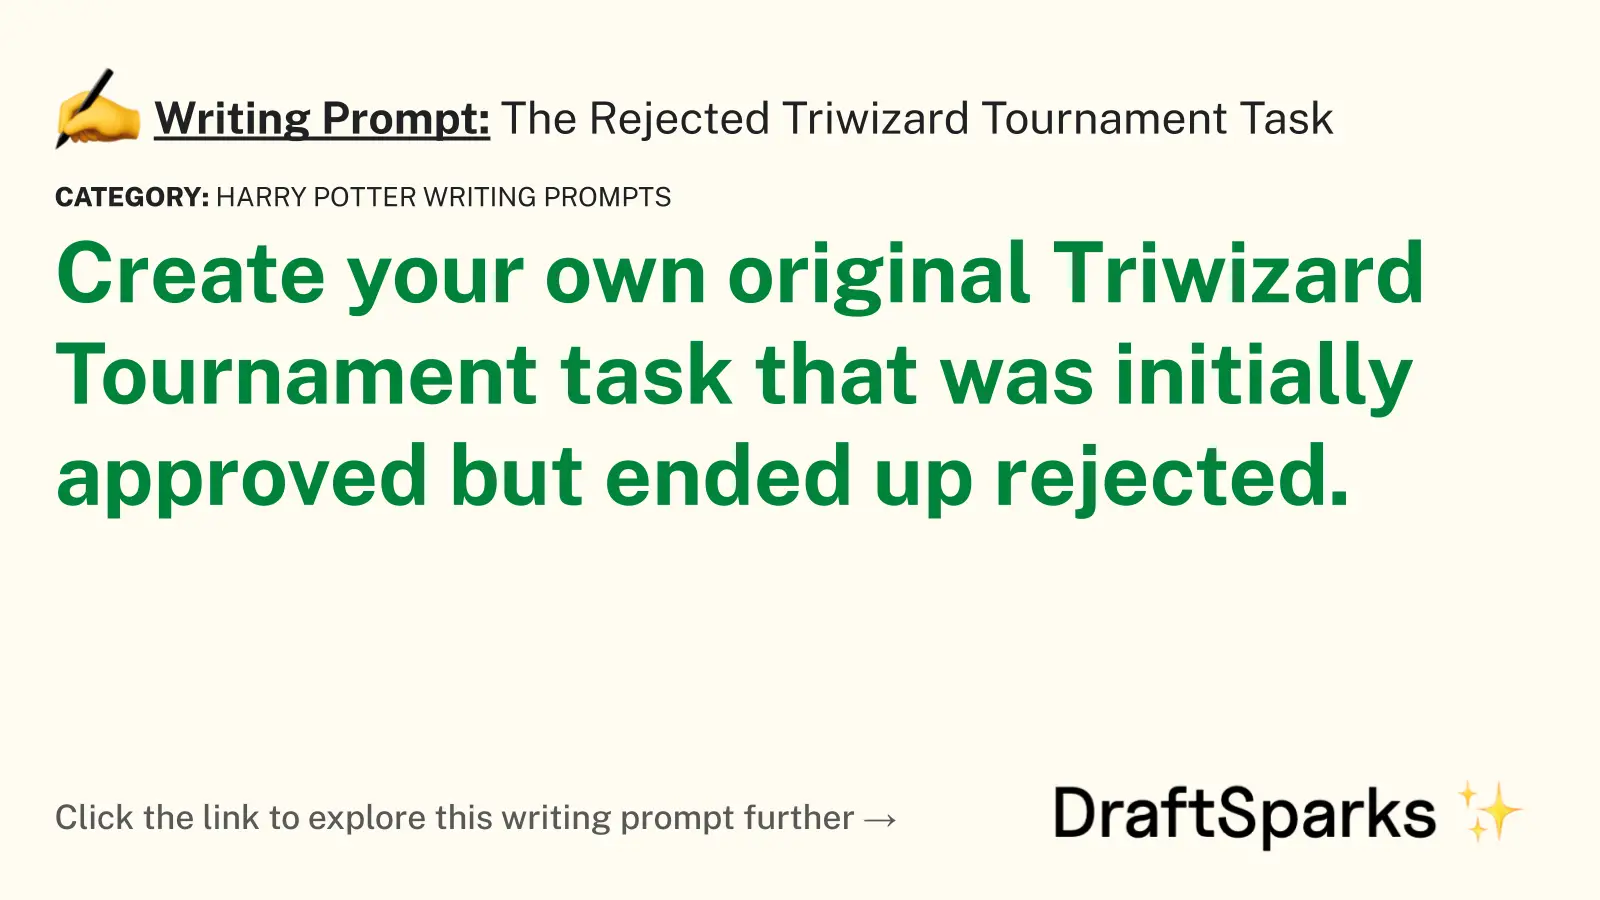 The Rejected Triwizard Tournament Task